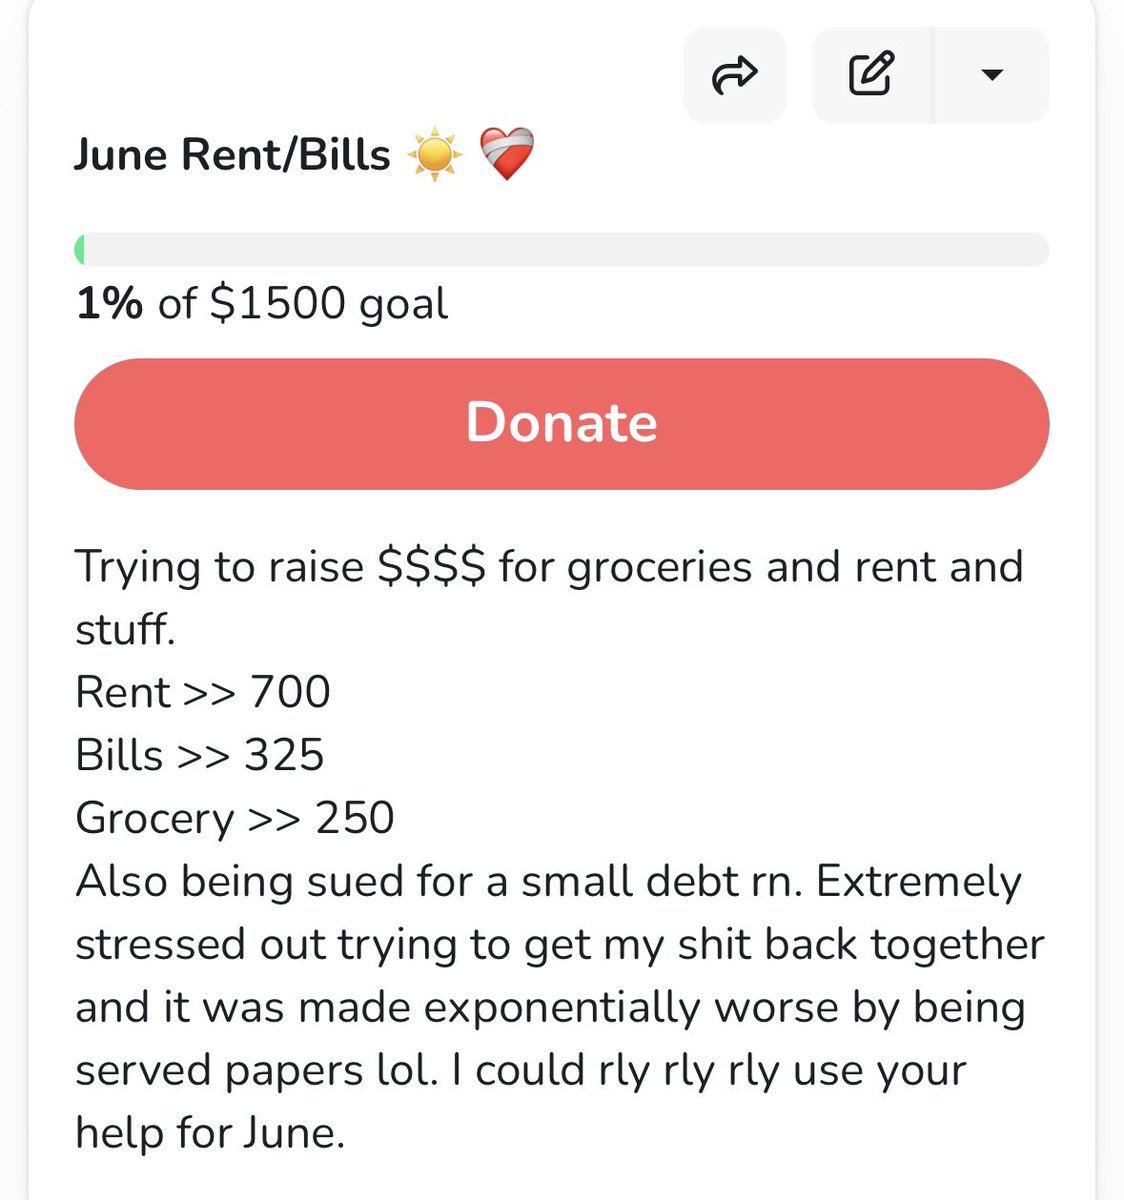 I could rly use your help for June! I've had a lot of food insecurity n issues keeping up with bills. I was also served papers (being su/ed) for a small de/b/t cuz my life fell apart last year when I got sick n I havent gottn better. I know i ask a lot, but not for enough. 😭❤️‍🩹